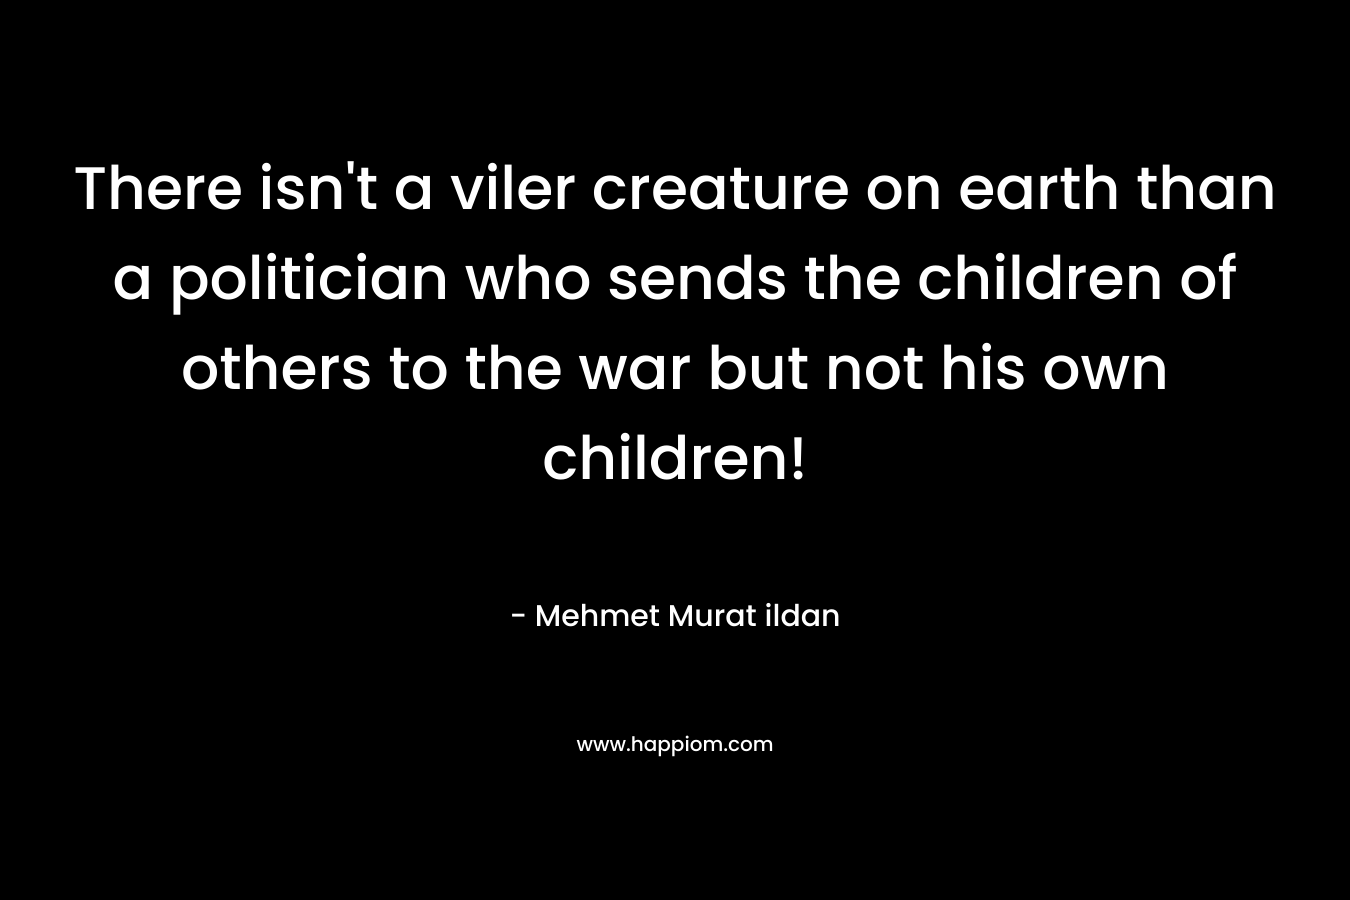 There isn't a viler creature on earth than a politician who sends the children of others to the war but not his own children!